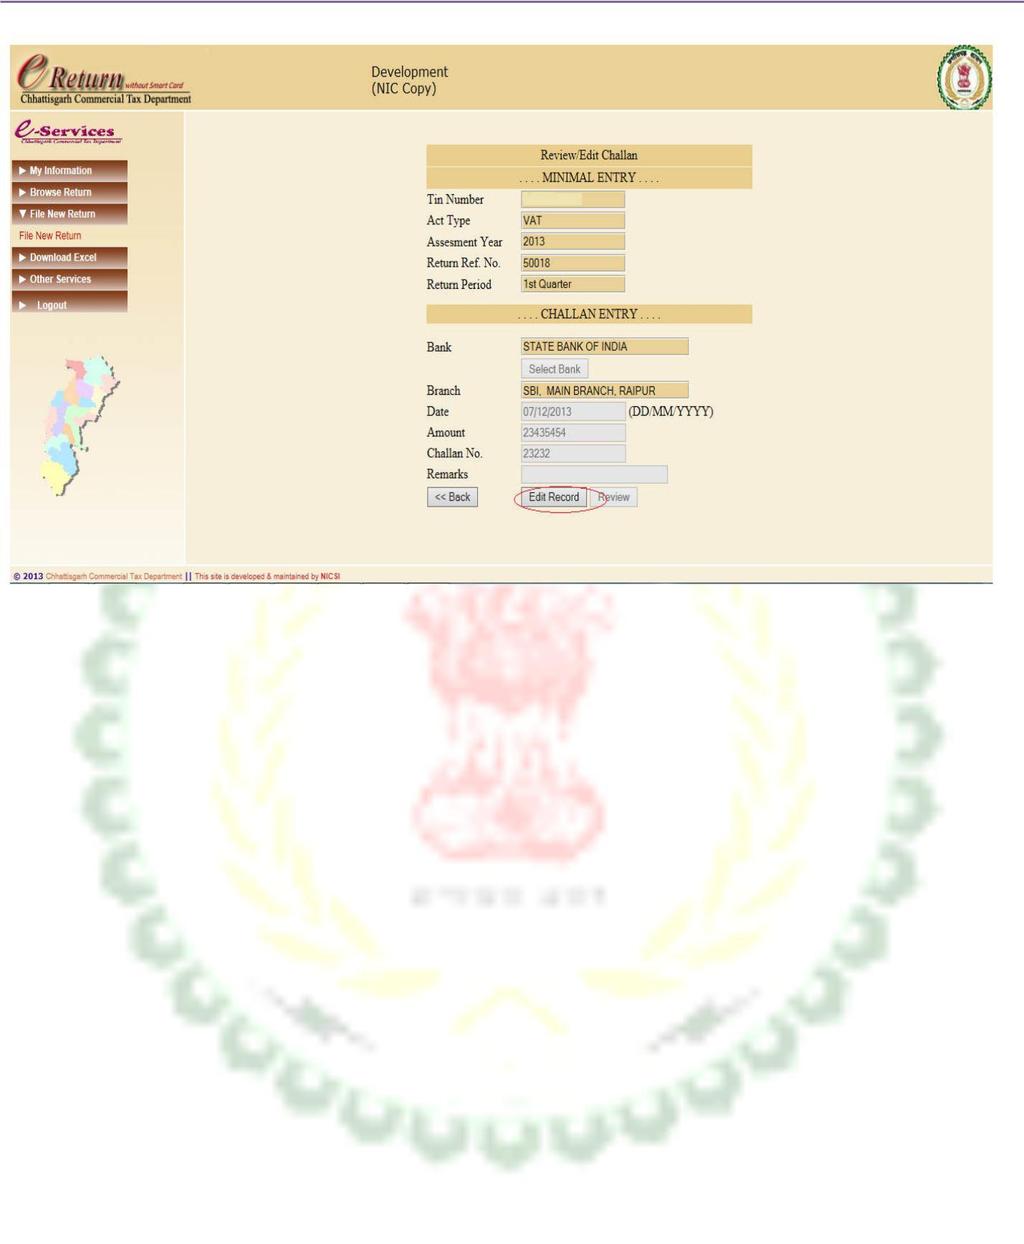 5> On click Challan Details in above image, the Edit page will open.